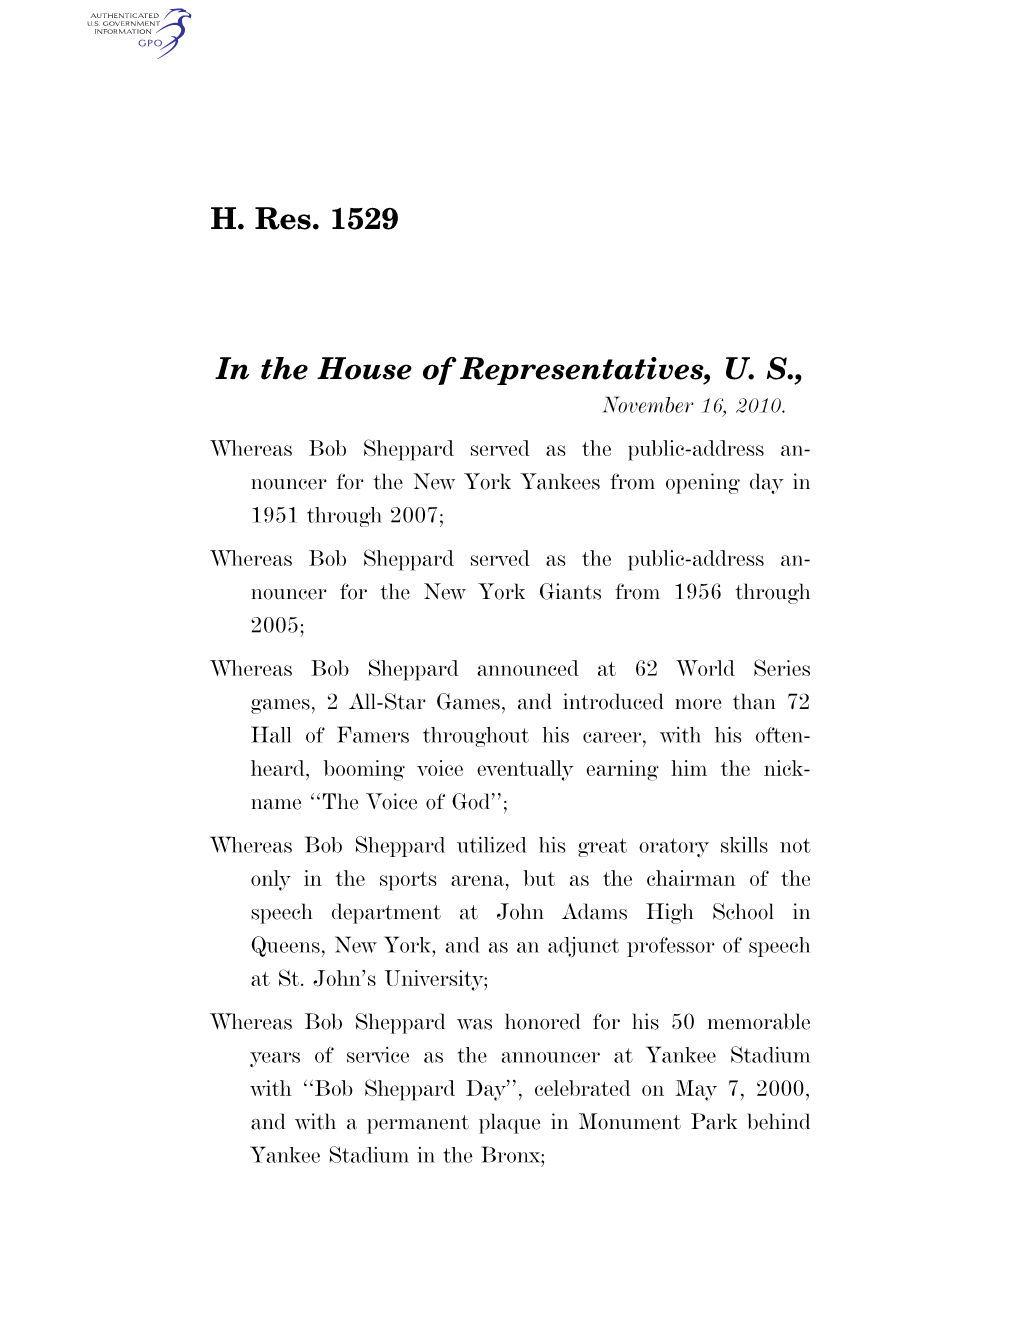 H. Res. 1529 in the House of Representatives, U